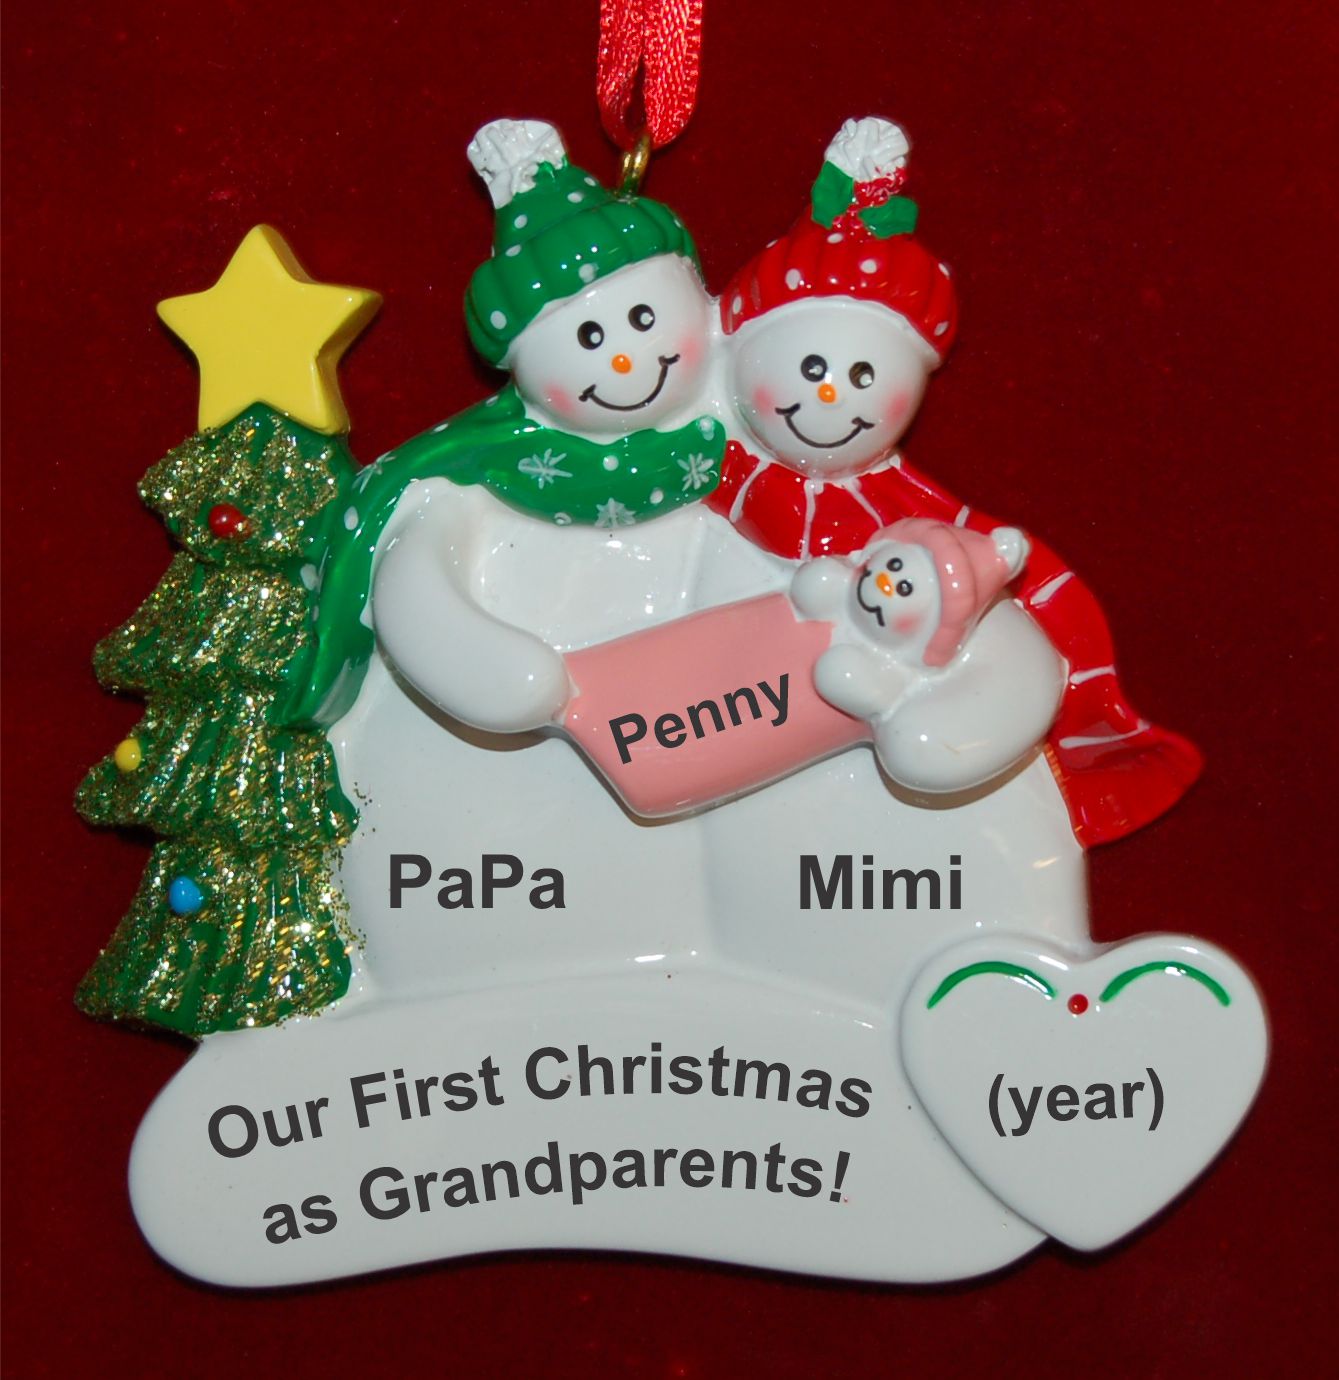 Our First Christmas as Grandparents with Baby Girl Christmas Ornament Personalized by RussellRhodes.com